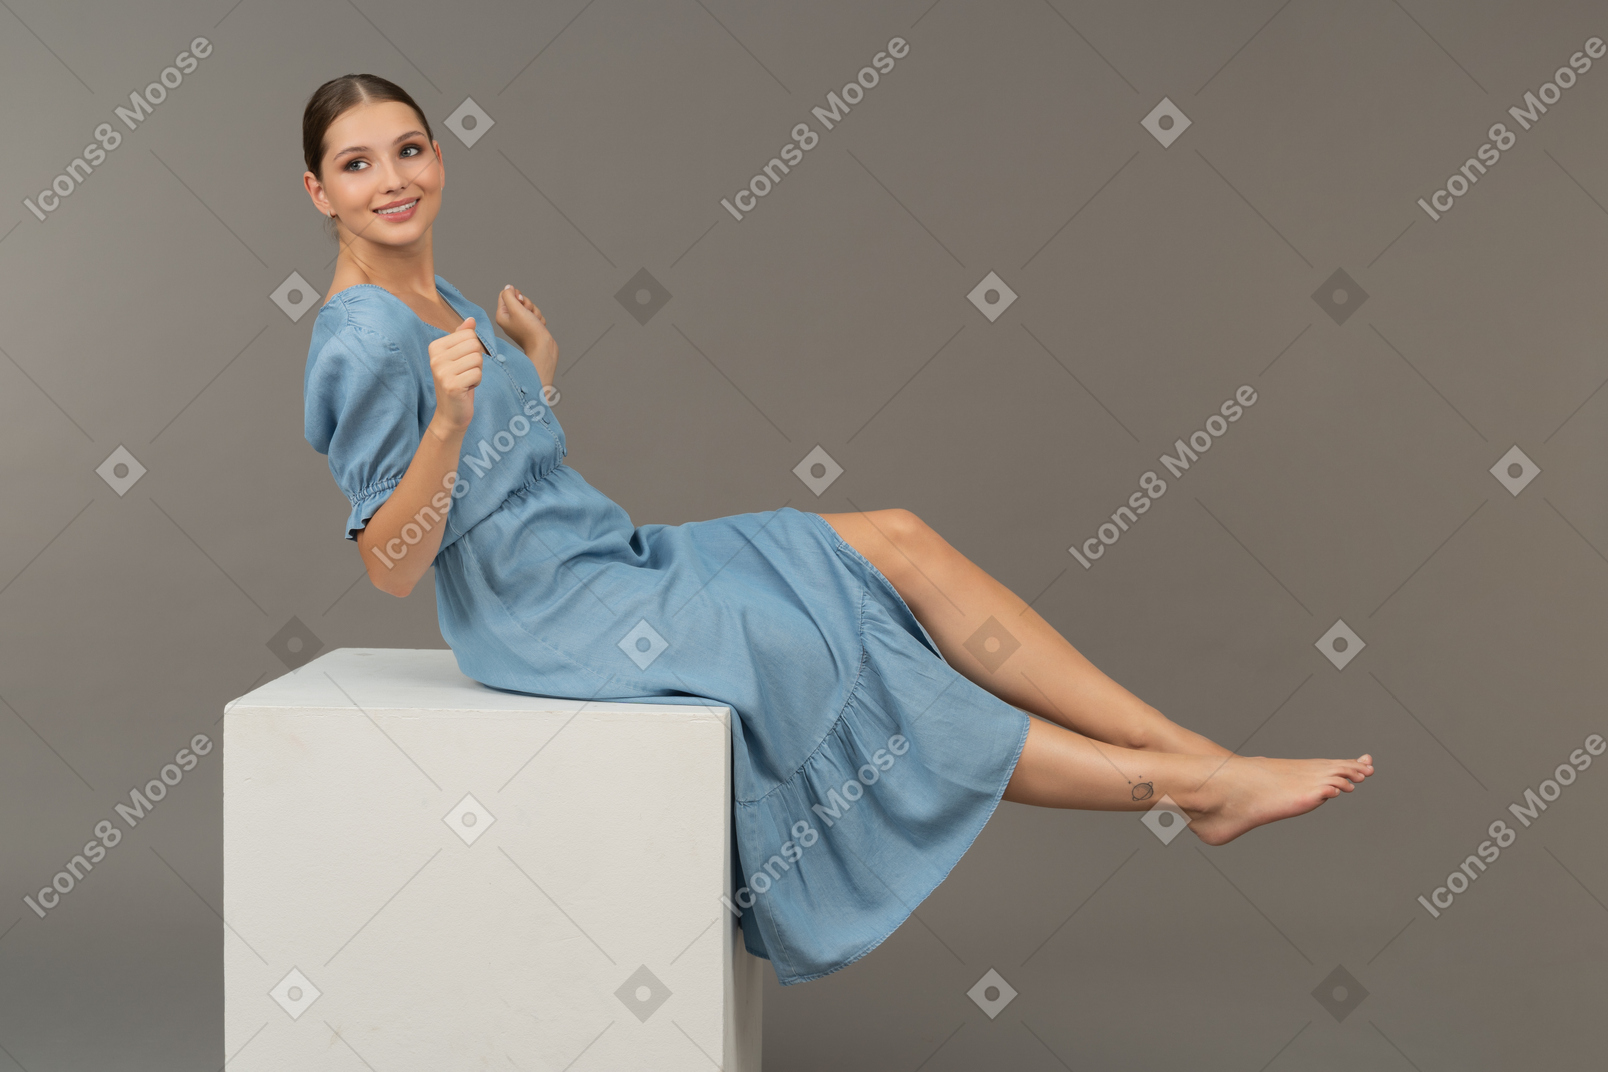 Side view of young woman sitting on cube and trying to keep balance